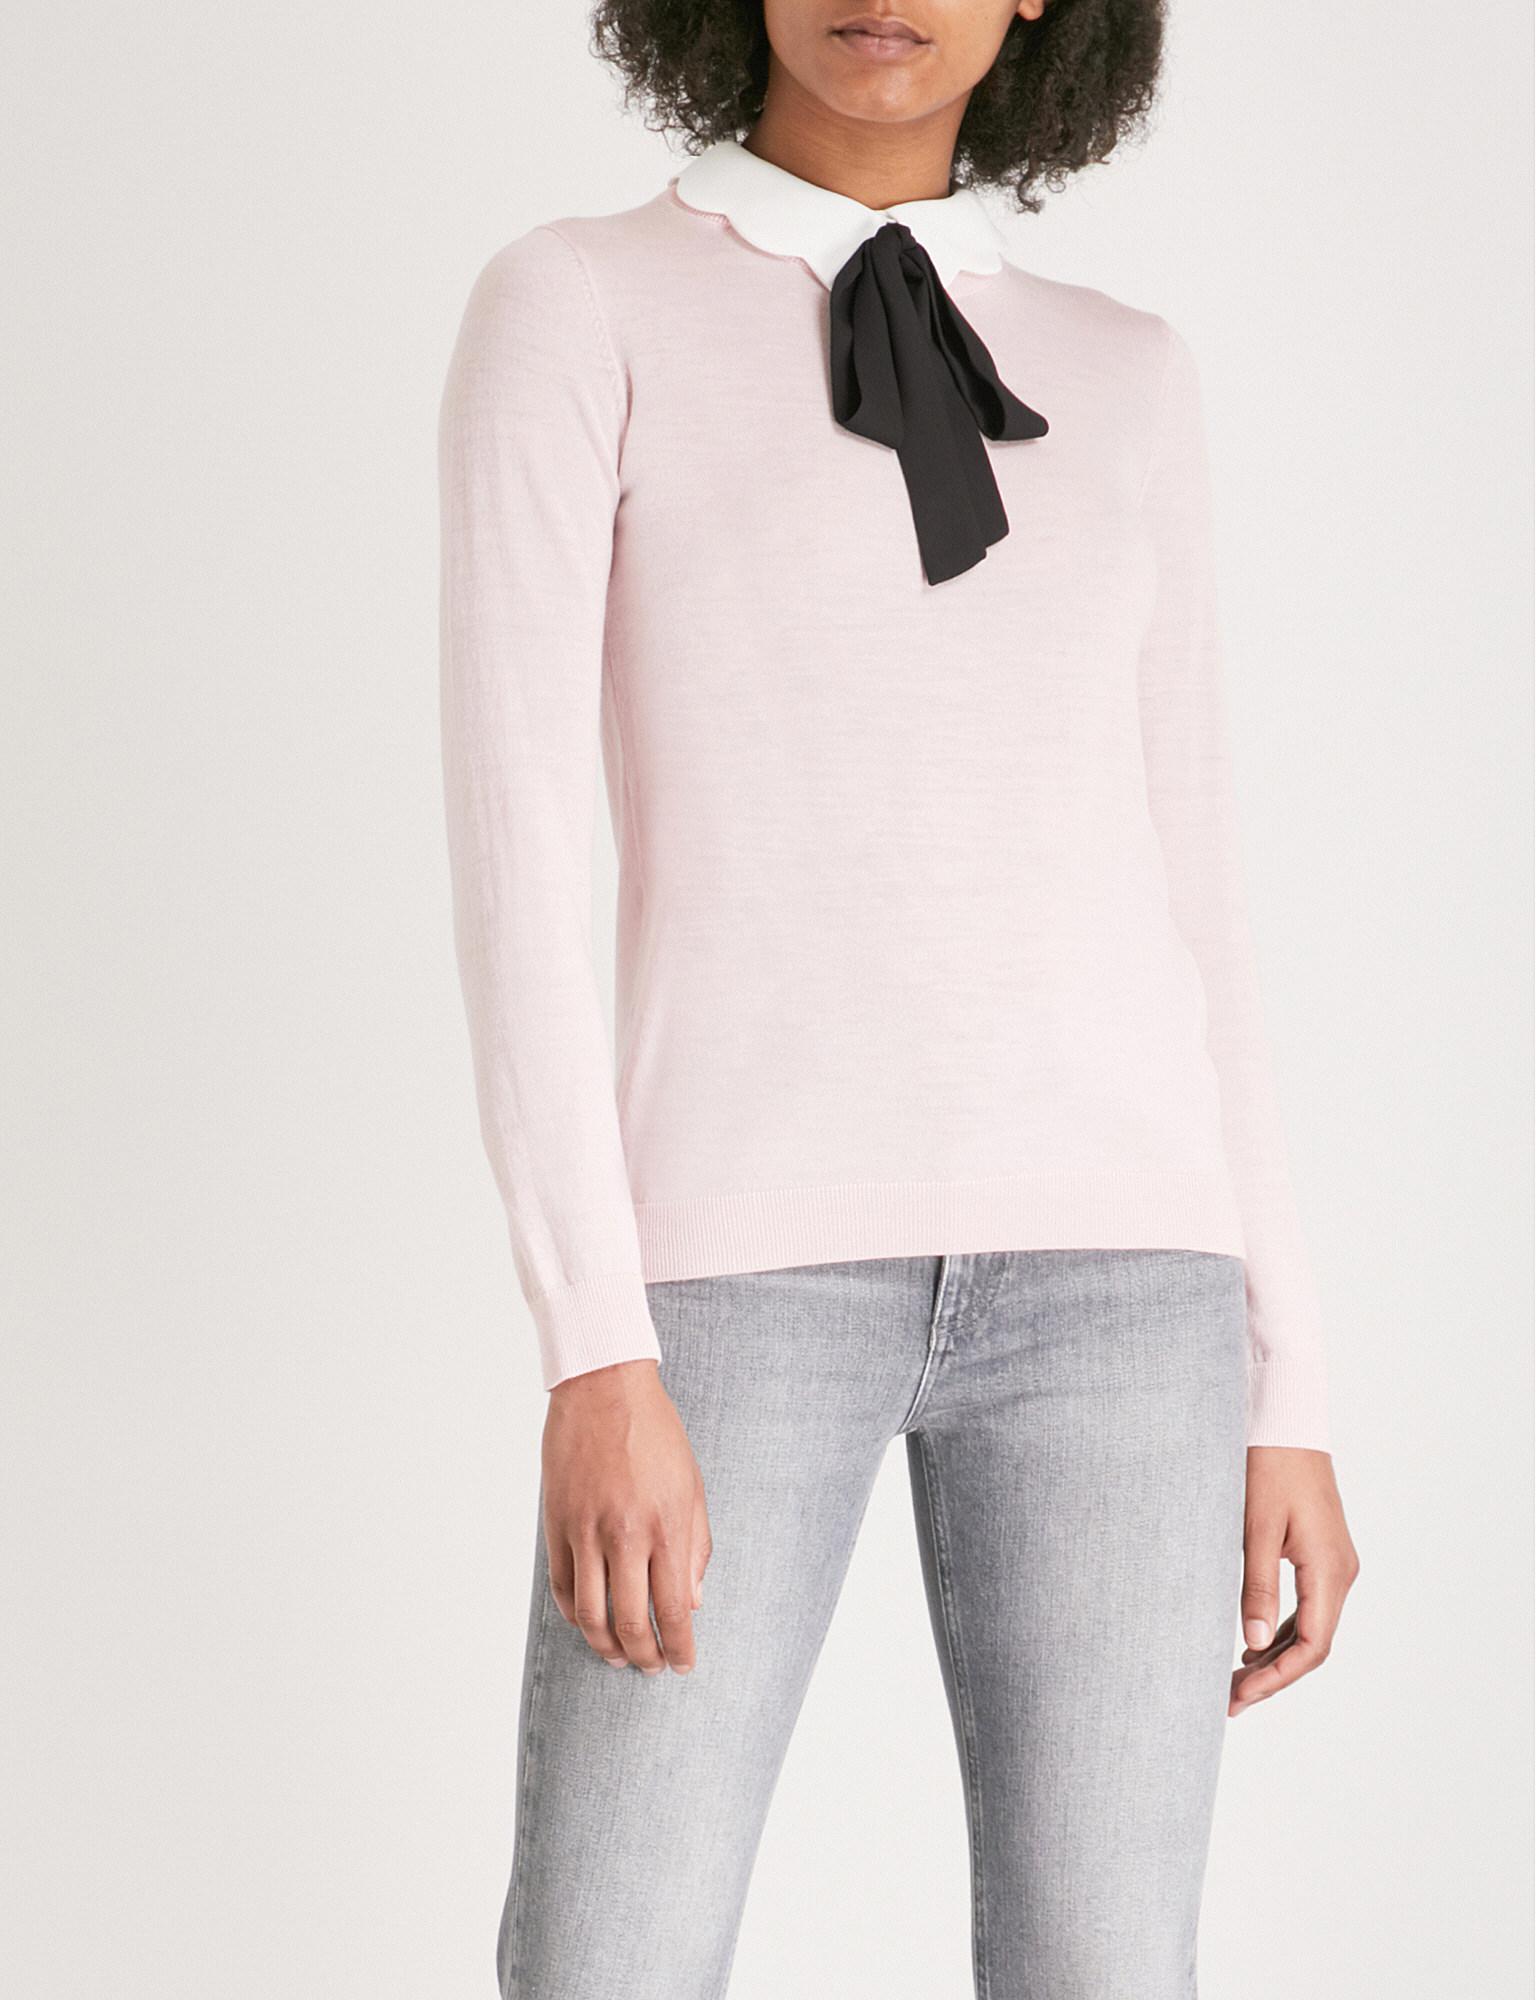 Claudie Pierlot Pussy Bow Collar Wool Jumper in White | Lyst